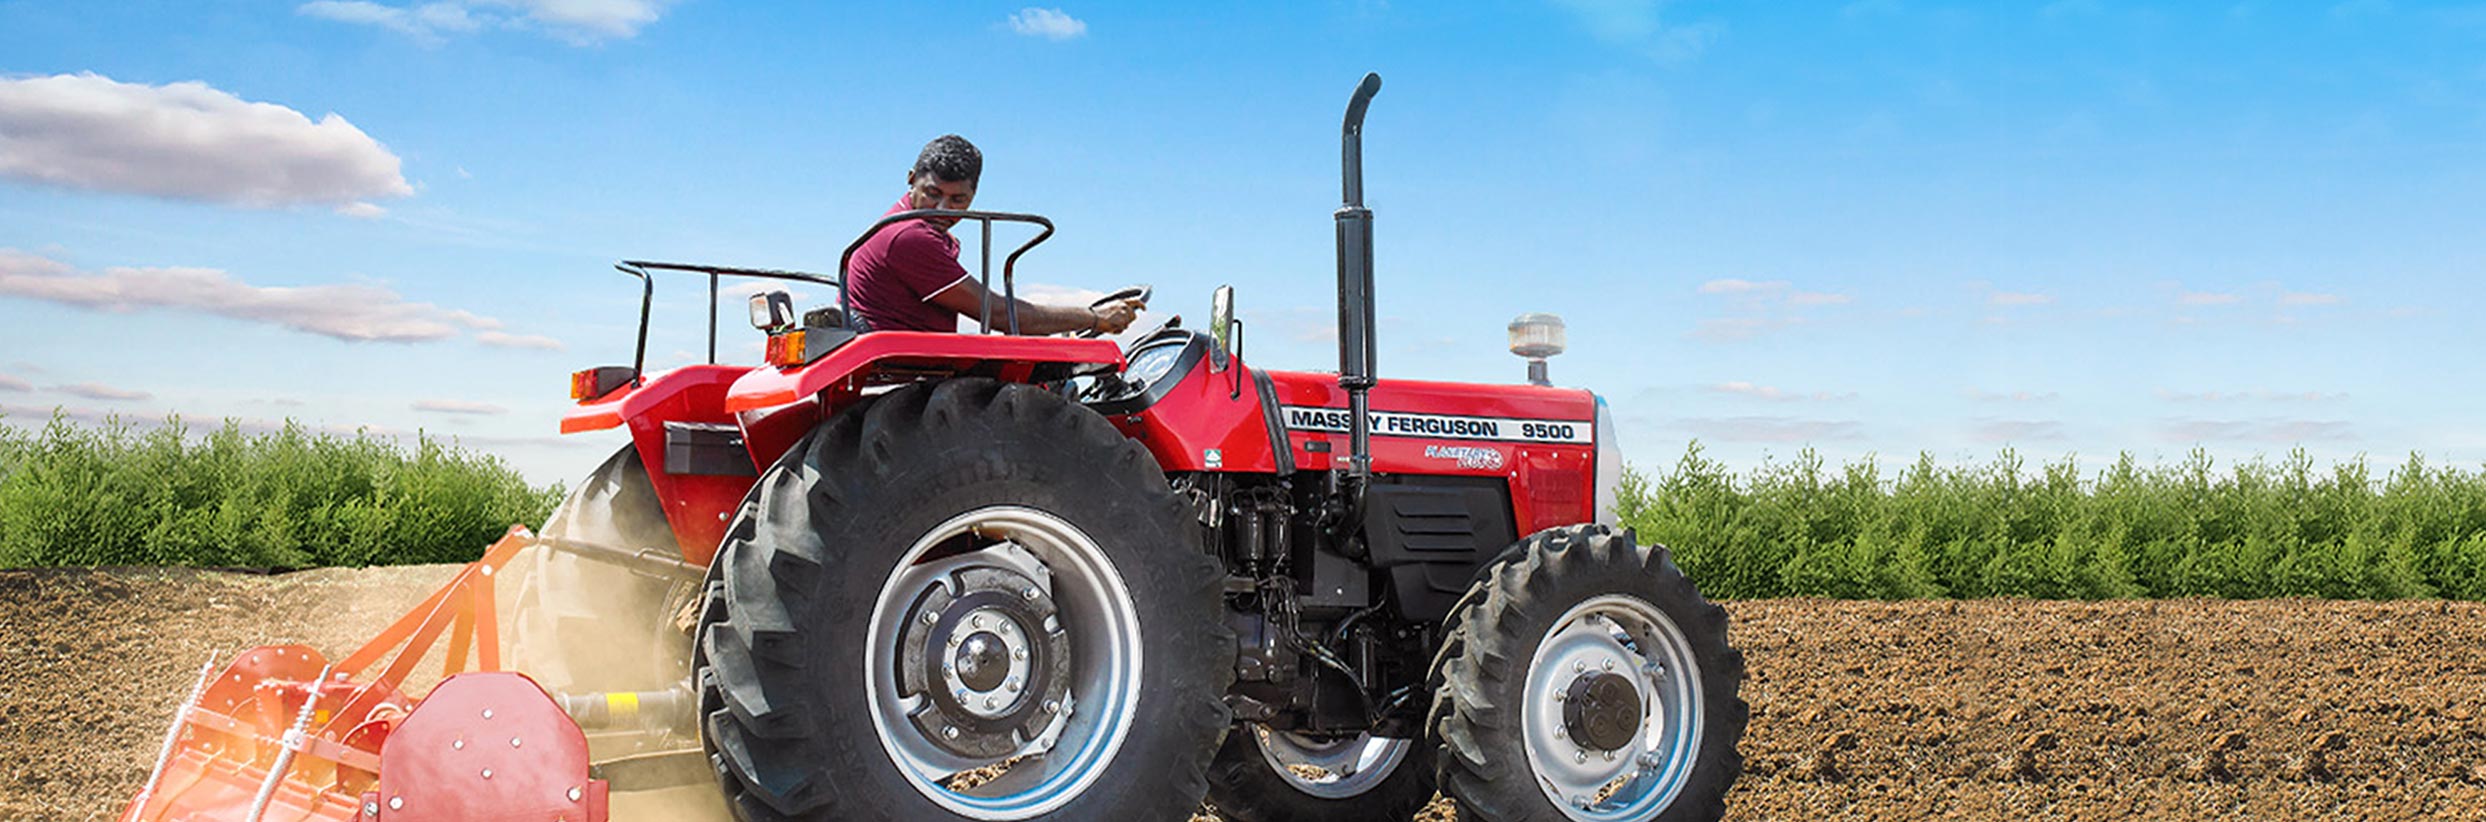 TAFE offers free tractor rental for small farmers of Tamil Nadu during COVID-19